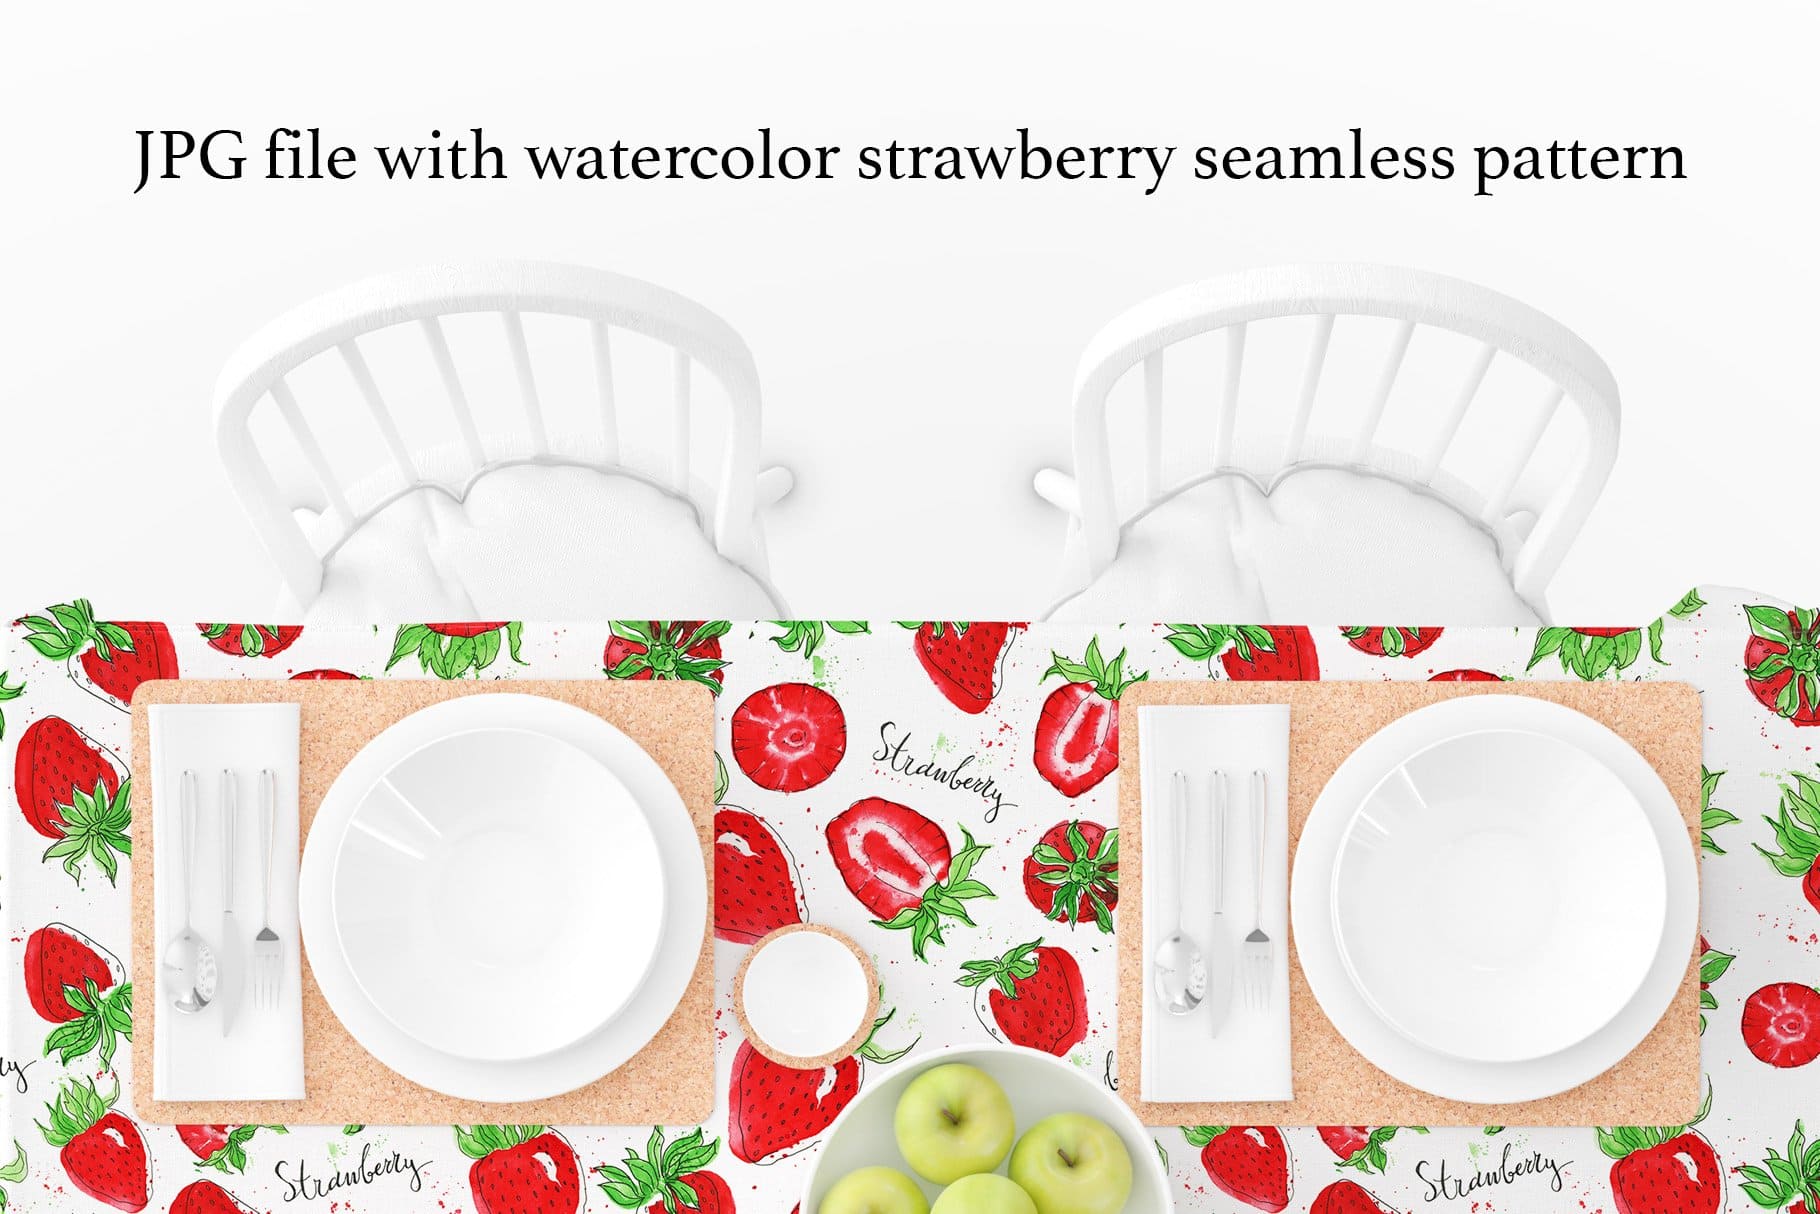 JPG file with watercolor strawberry seamless pattern.